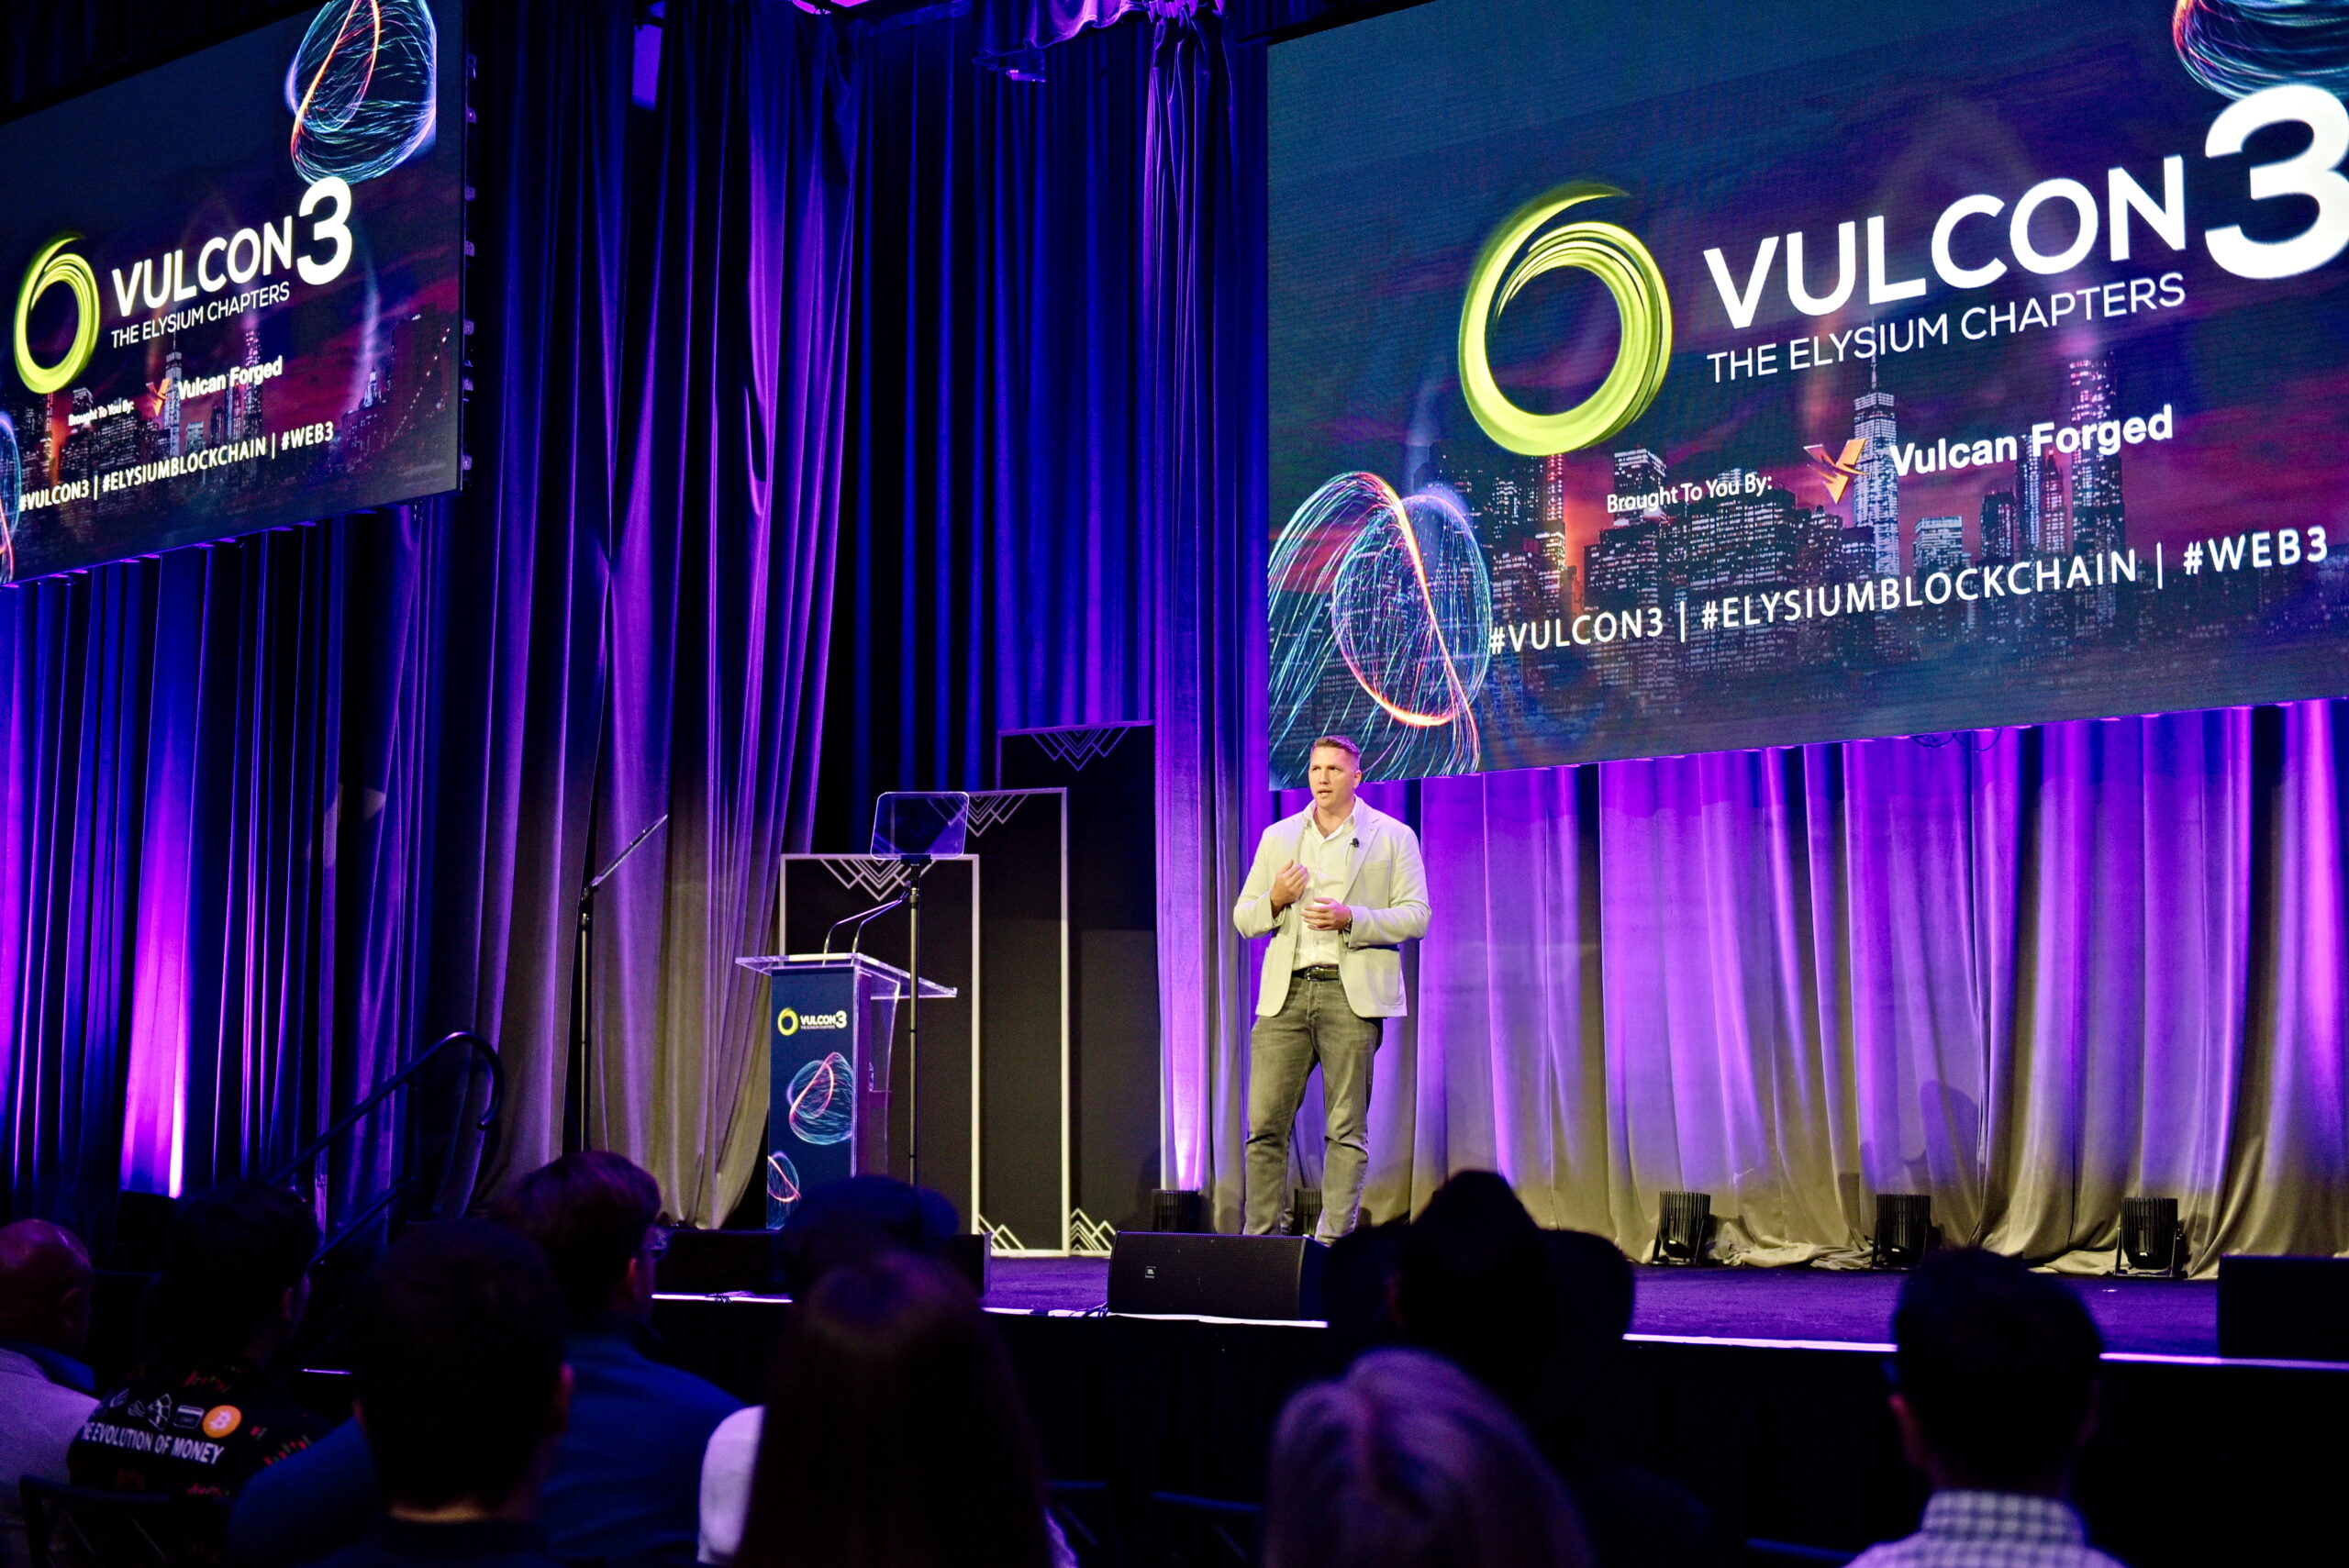 Jamie Thomson, CEO of Vulcan Forged on stage at the Ziegfeld Ballroom, New York, for VulCon3 in 2023.